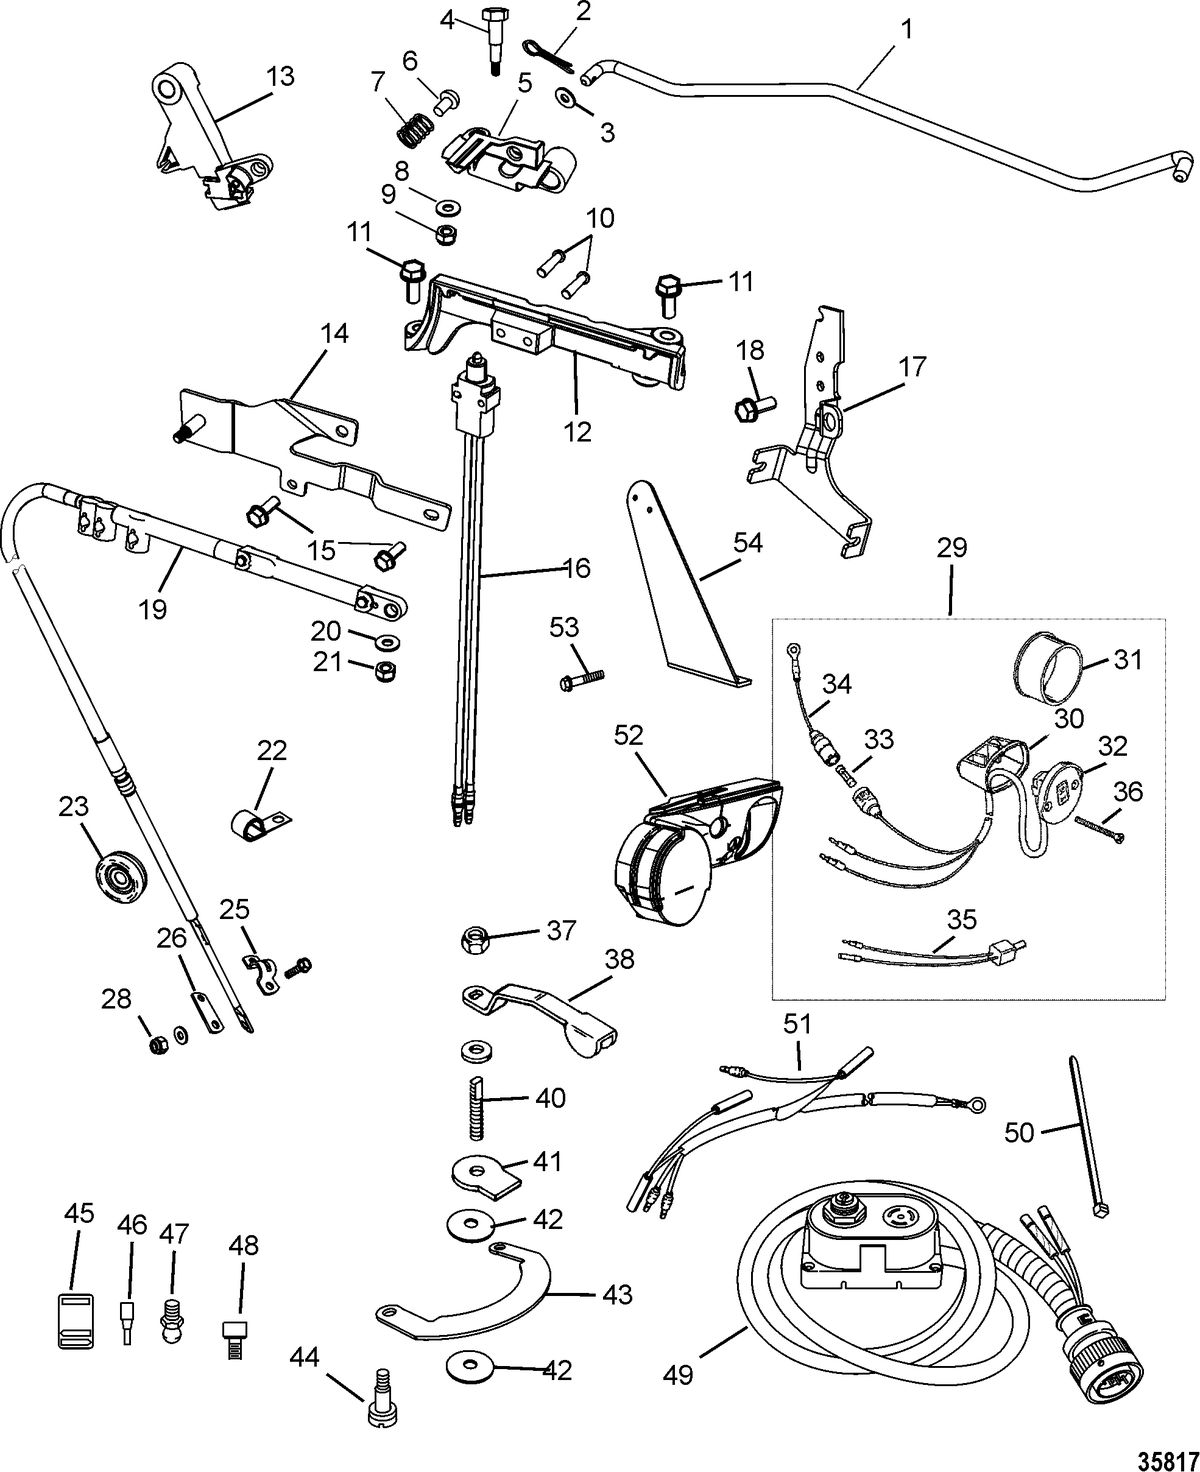 ACCESSORIES STEERING SYSTEMS AND COMPONENTS Tiller Handle Kit Components(Jet 40)